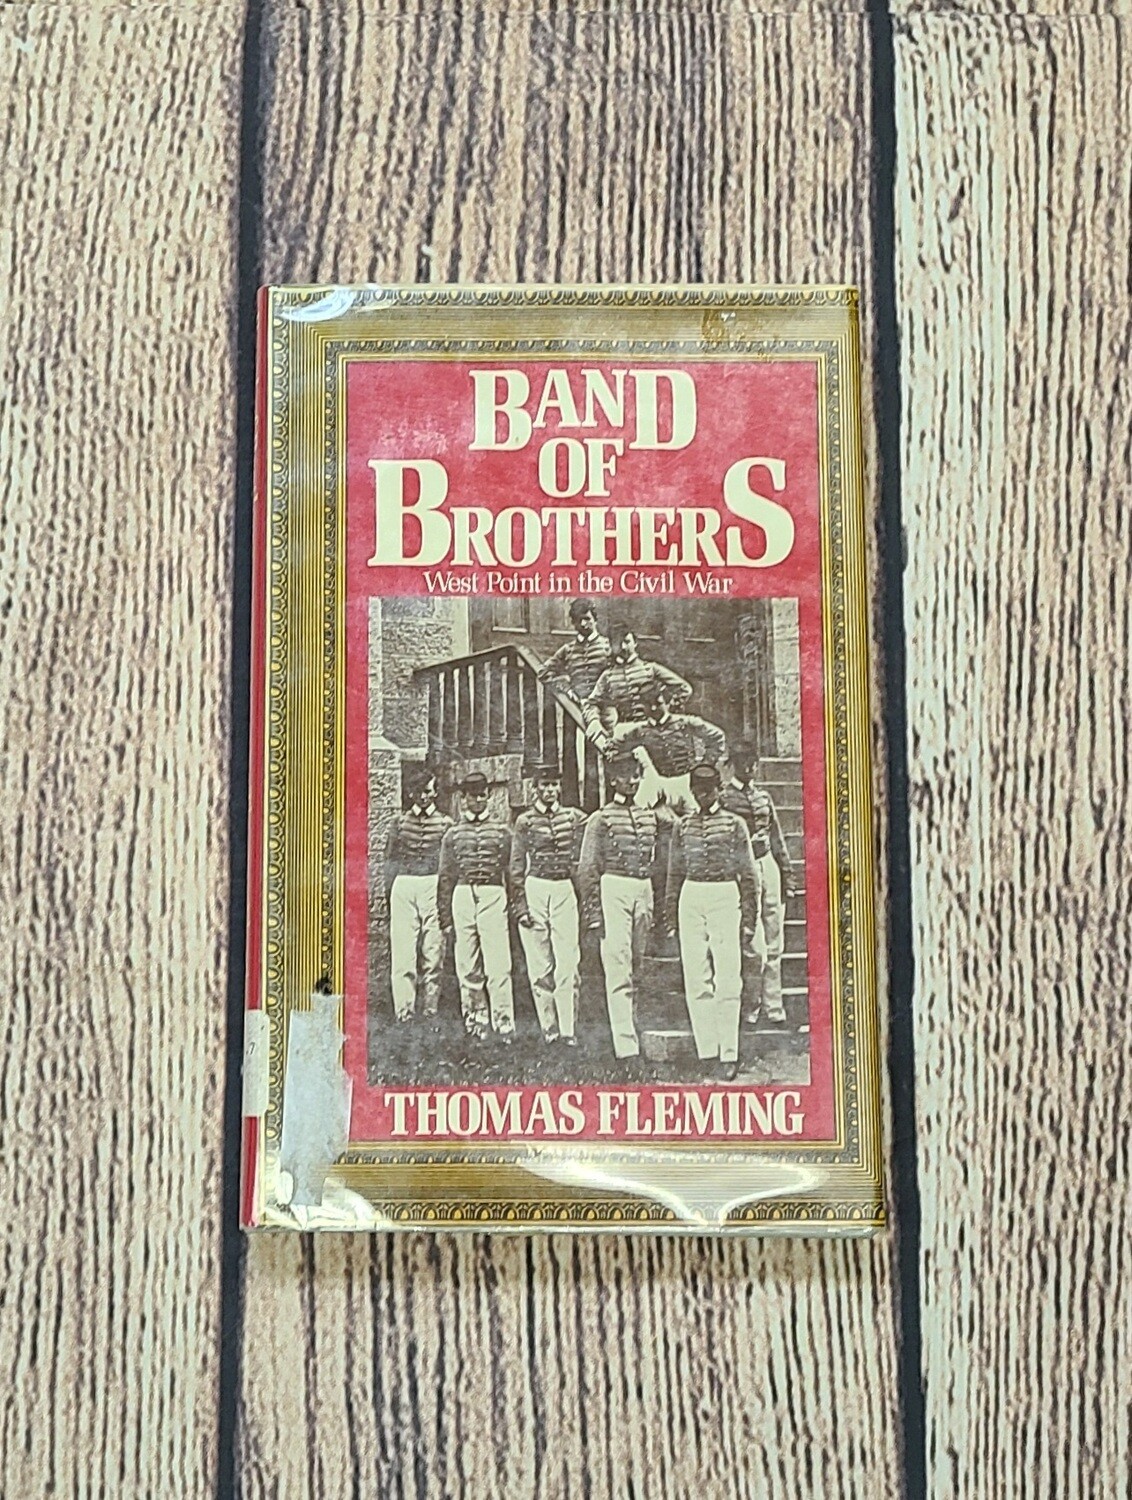 Band of Brothers: West Point in the Civil War by Thomas Fleming